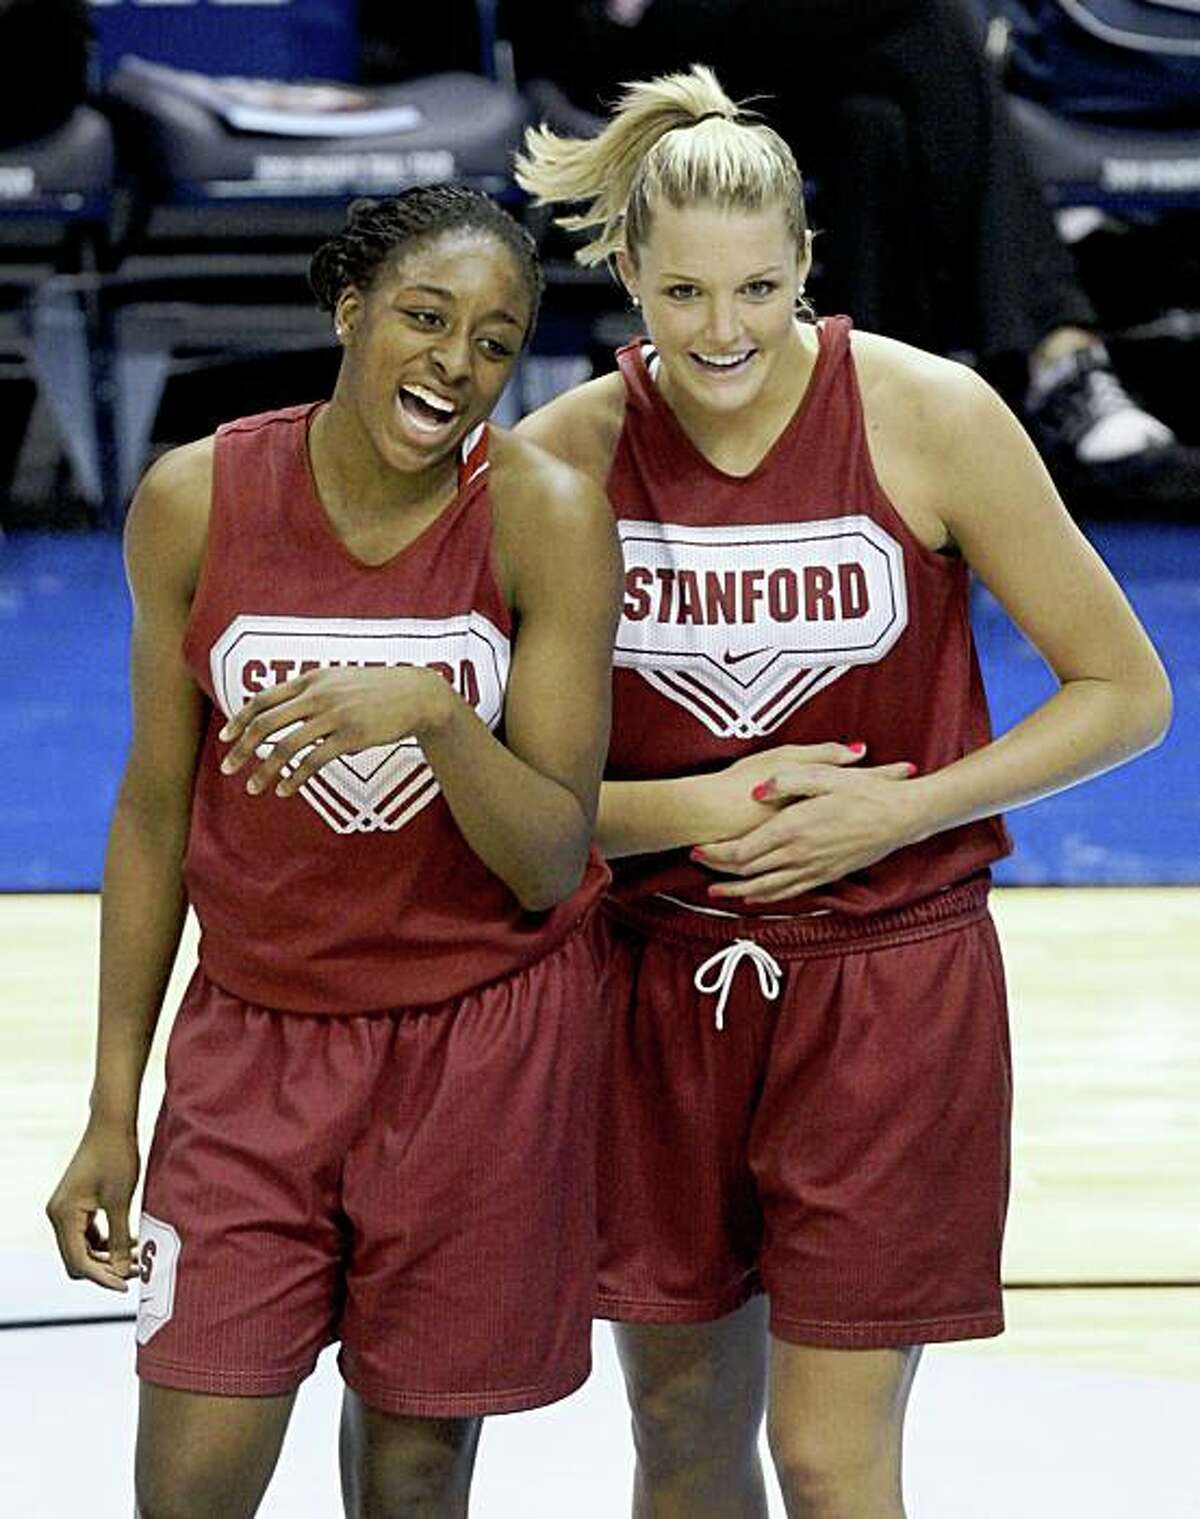 Stanford's Nnemkadi Ogwumike, left, and Jayne Appel react during basketball practice at the NCAA Women's Final Four, Saturday, April 4, 2009, in St. Louis. (AP Photo/Jeff Roberson)